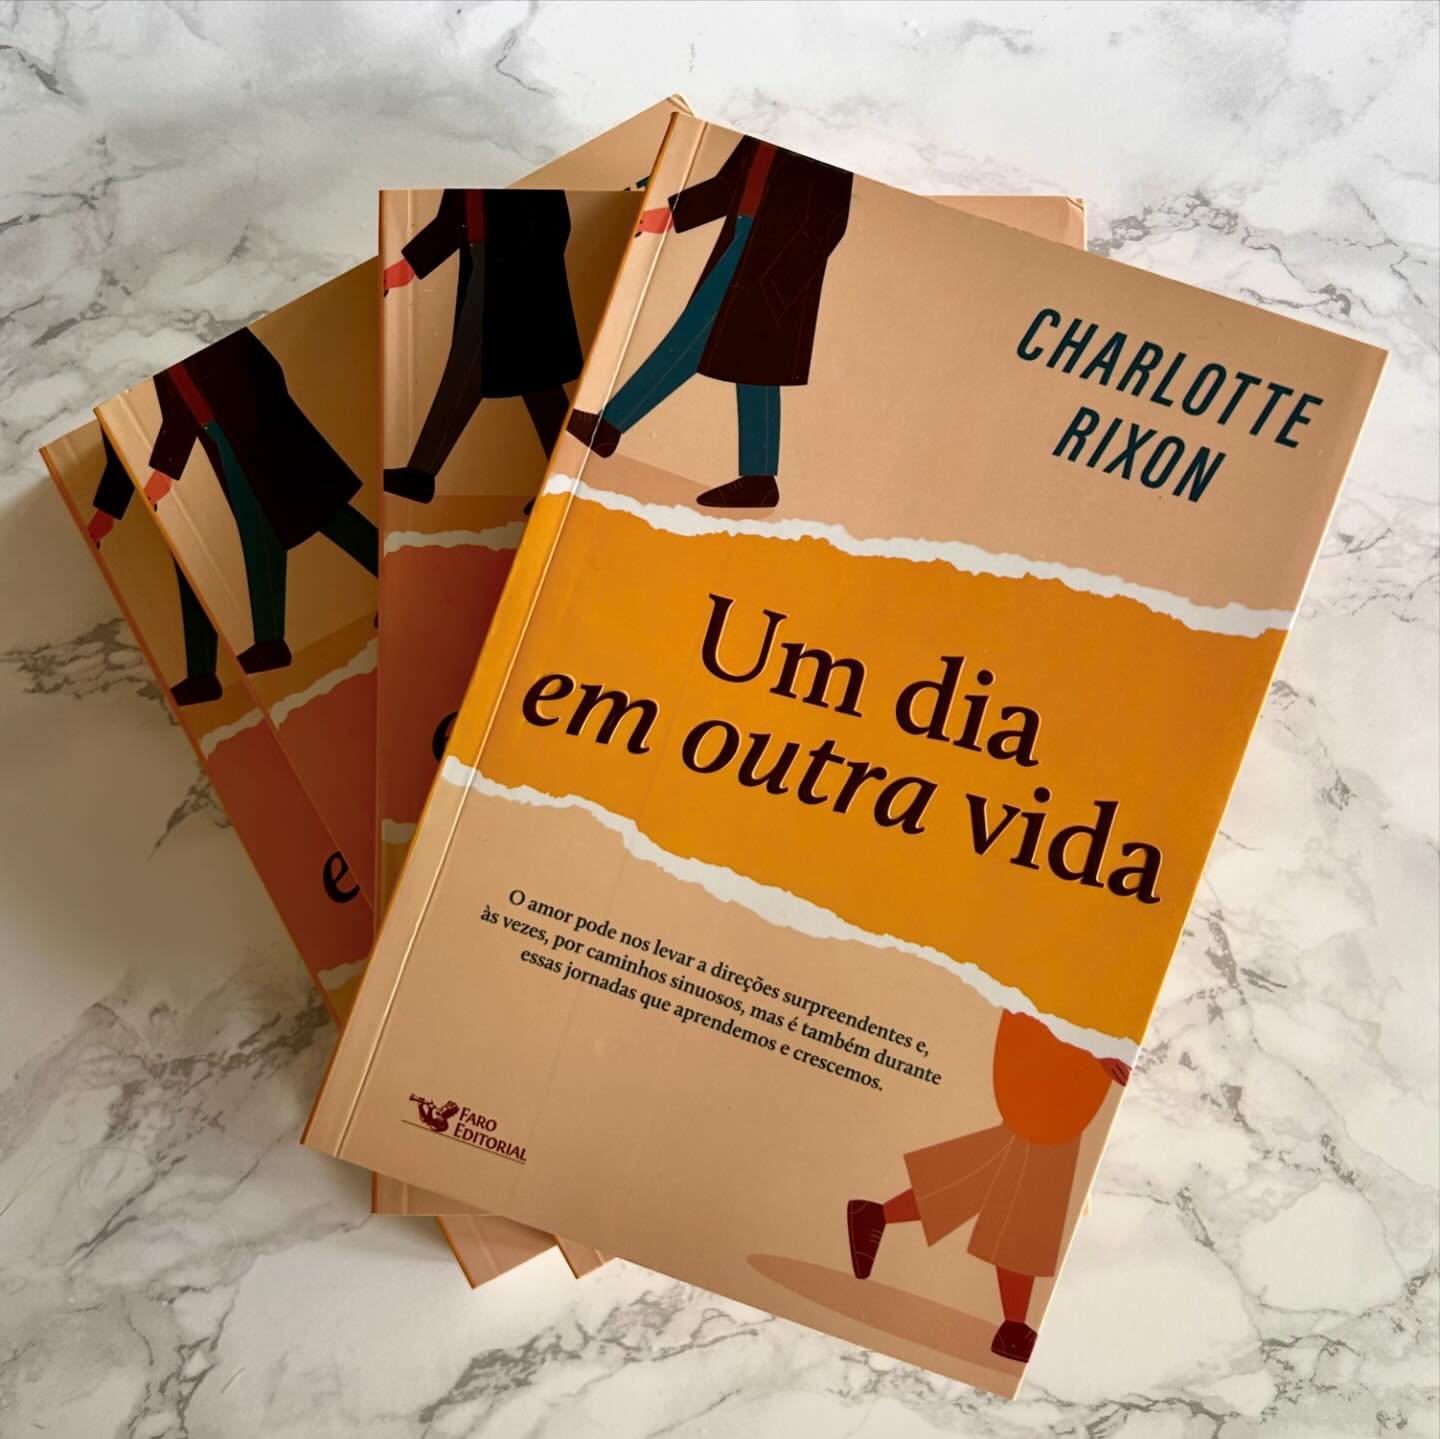 ✨ I received my Brazilian author copies of The One That Got Away today, along with a gorgeous note that brought a lump to my throat (swipe to read). As always, it&rsquo;s so exciting and surreal to see my words in a foreign language. But I&rsquo;ve n